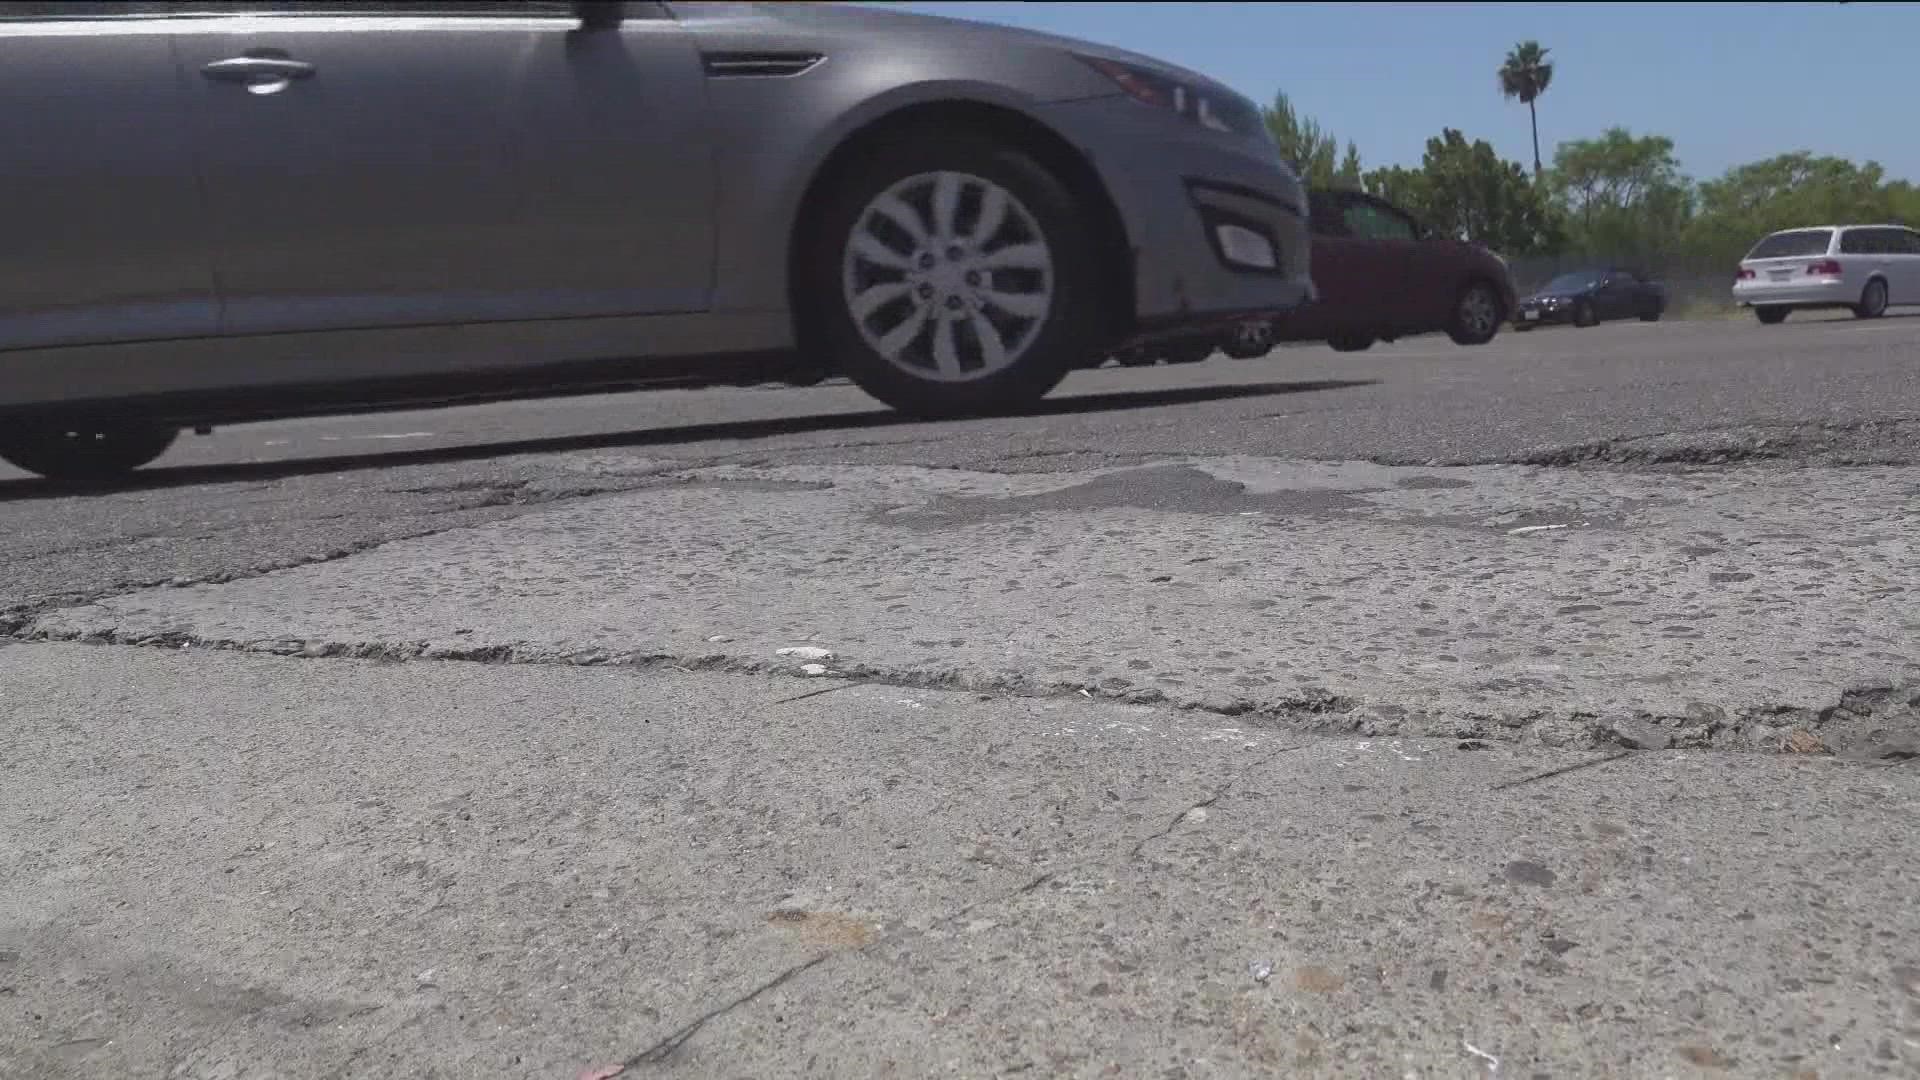 In just the past nine days, the city has received more than 1100 reports of potholes.